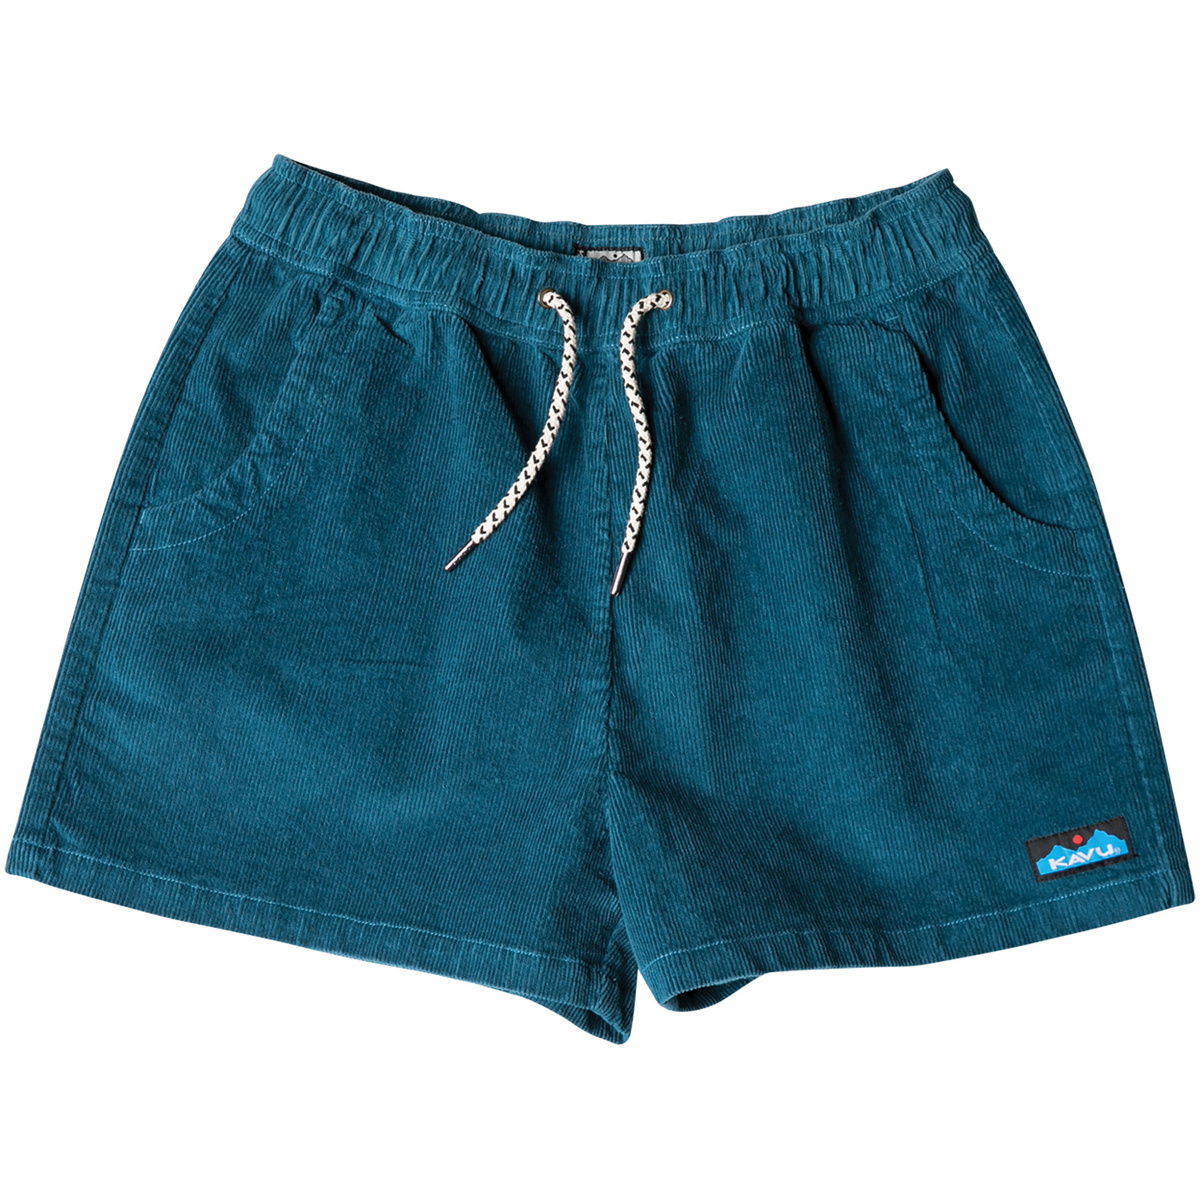 Image of Kavu Donna Pantaloncini All Decked Out